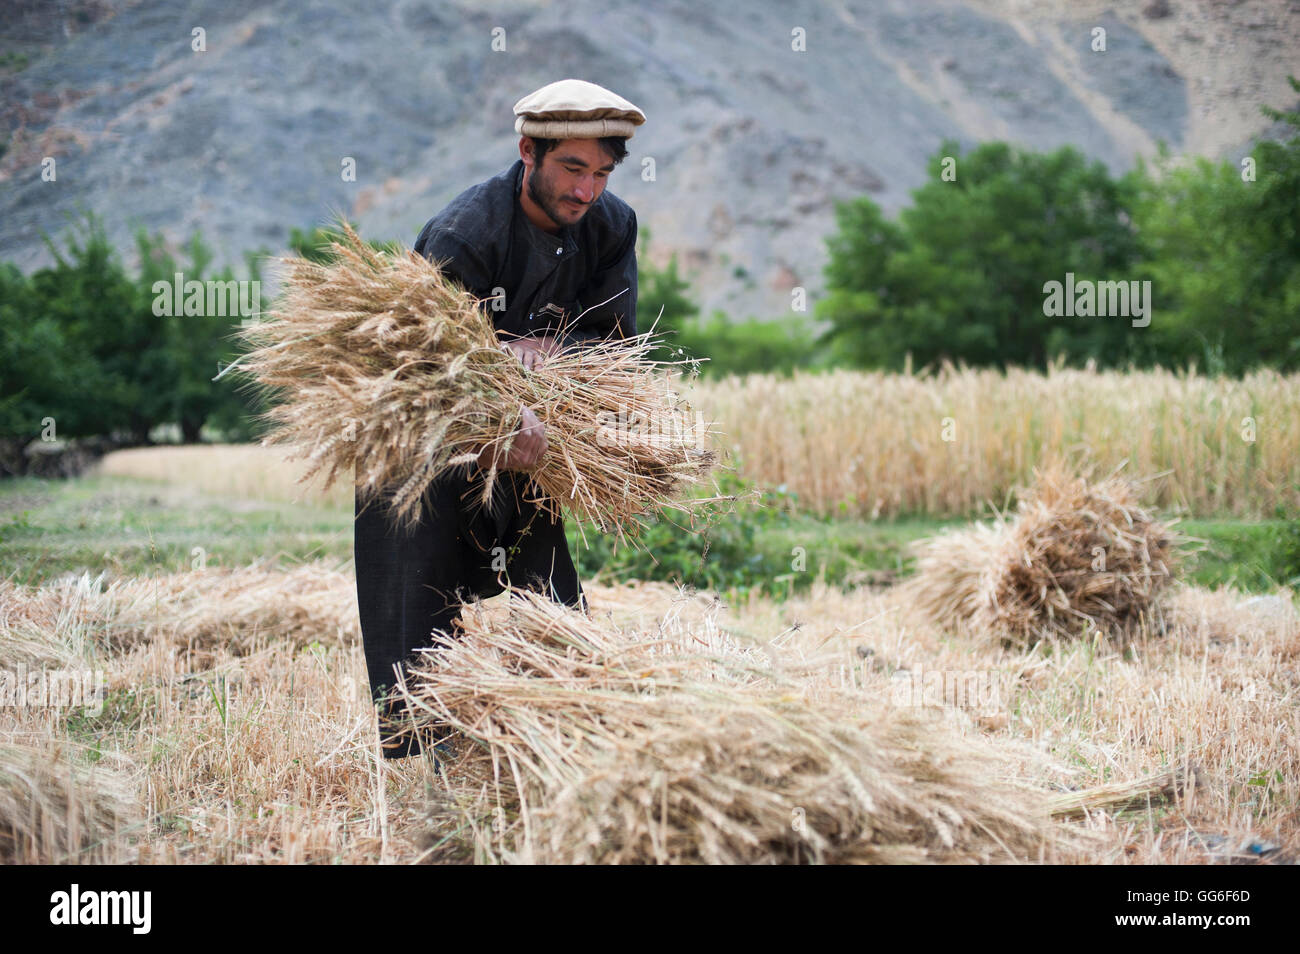 A farmer holds a freshly cut bundle of wheat in the Panjshir Valley, Afghanistan, Asia Stock Photo